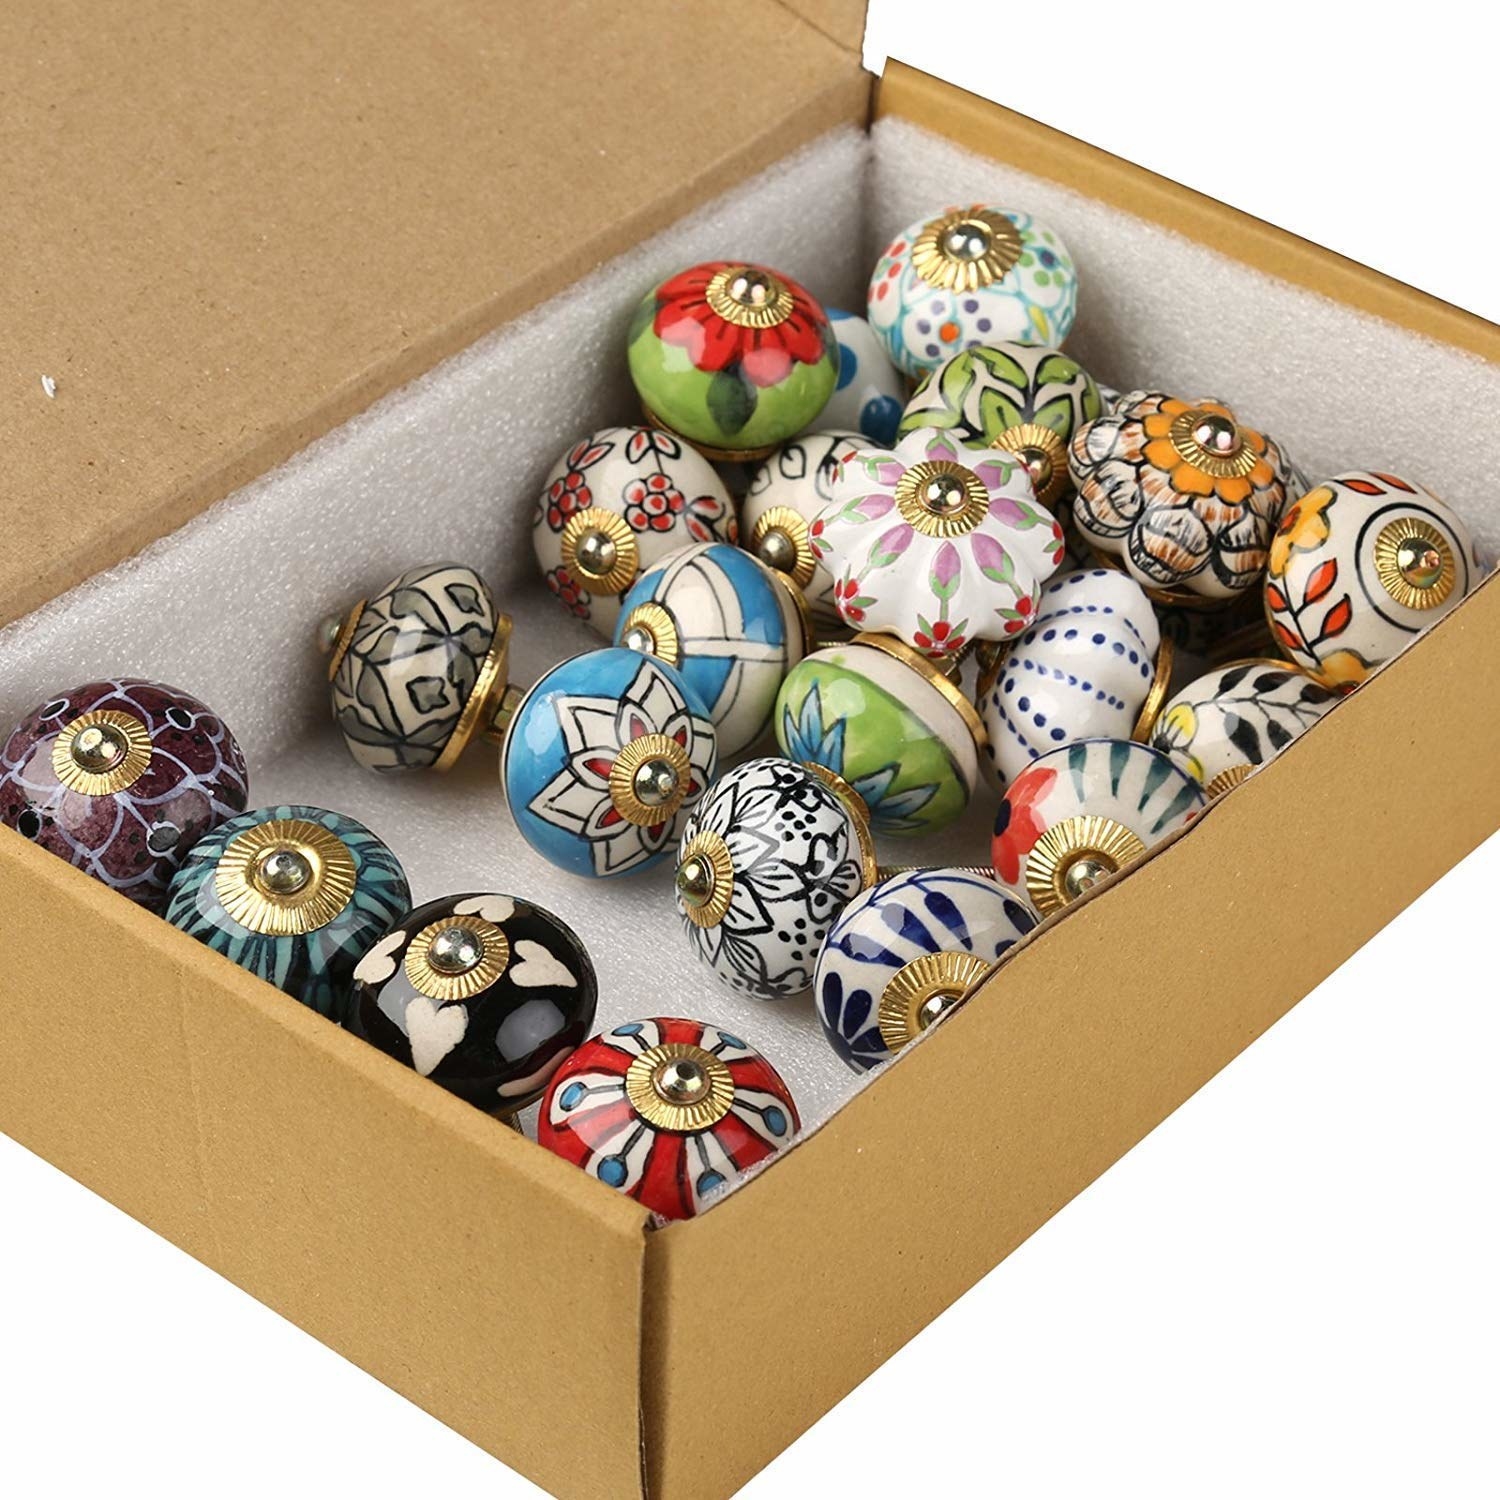 A set of colourful doorknobs in a box 